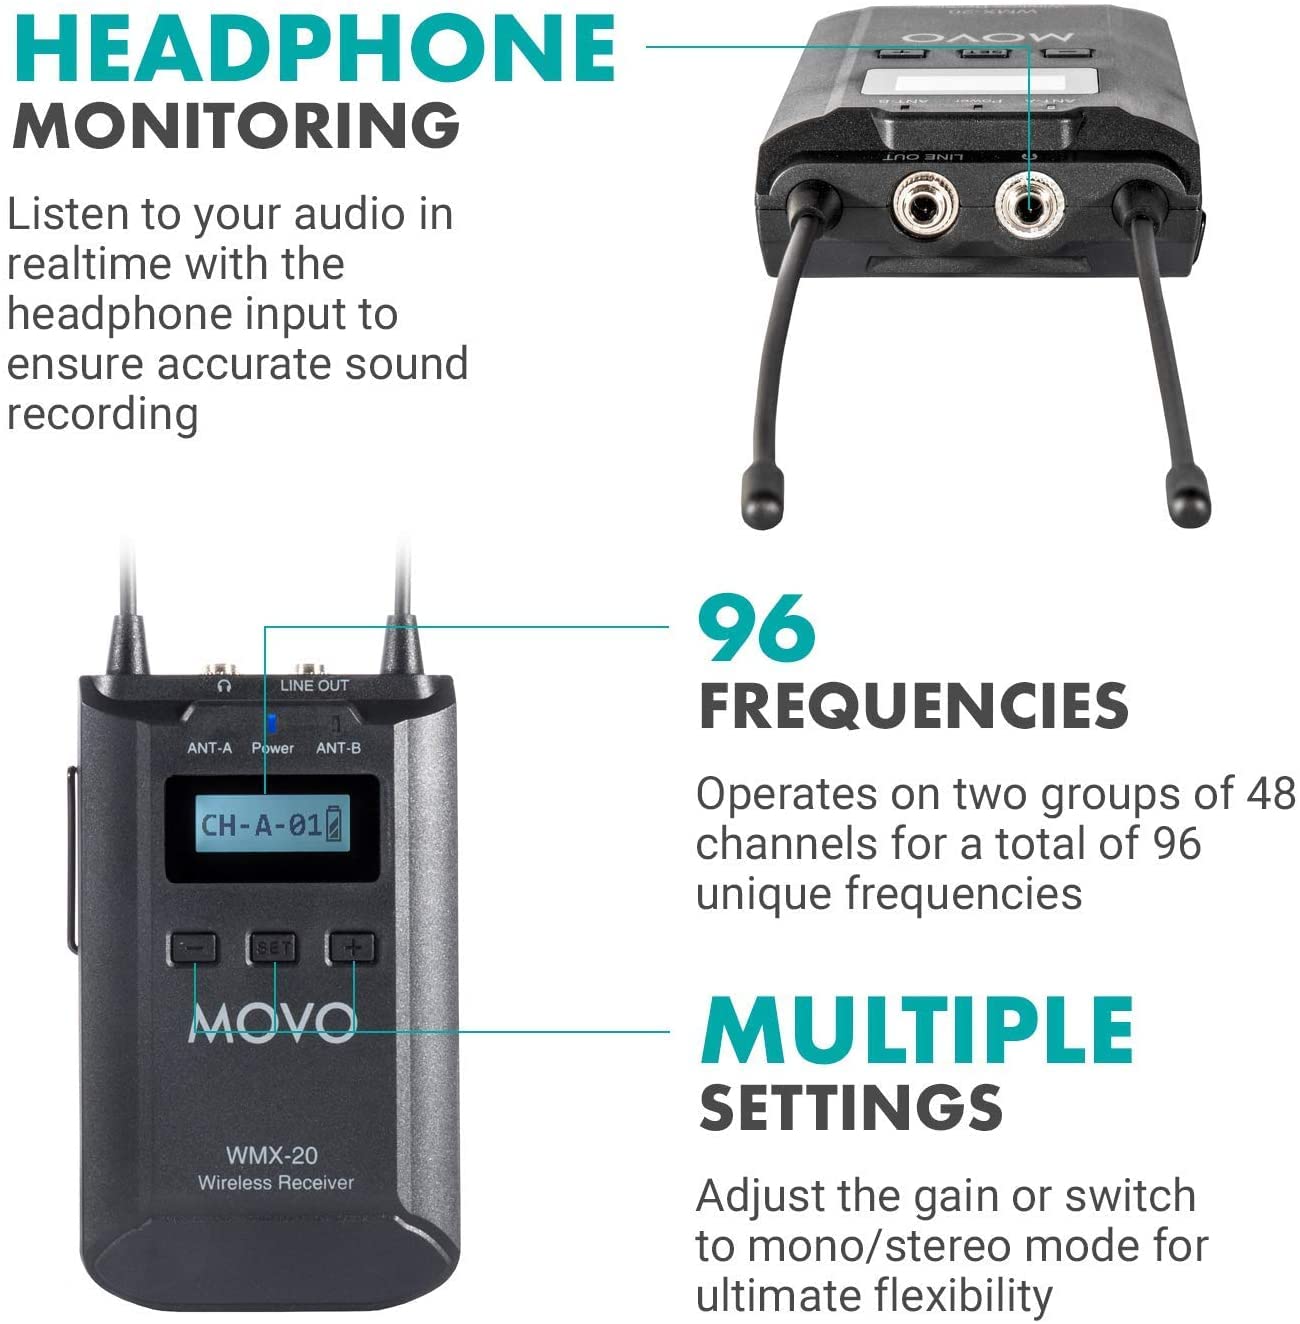 Movo WMX-20-RX-TXLR Wireless Microphone System with Plug-on XLR Transmitter Adapter and Portable Receiver - Converts Self Powered Shotgun Mics, Lavs, Dynamic Microphones to Wireless - for Stage, Film  - Like New